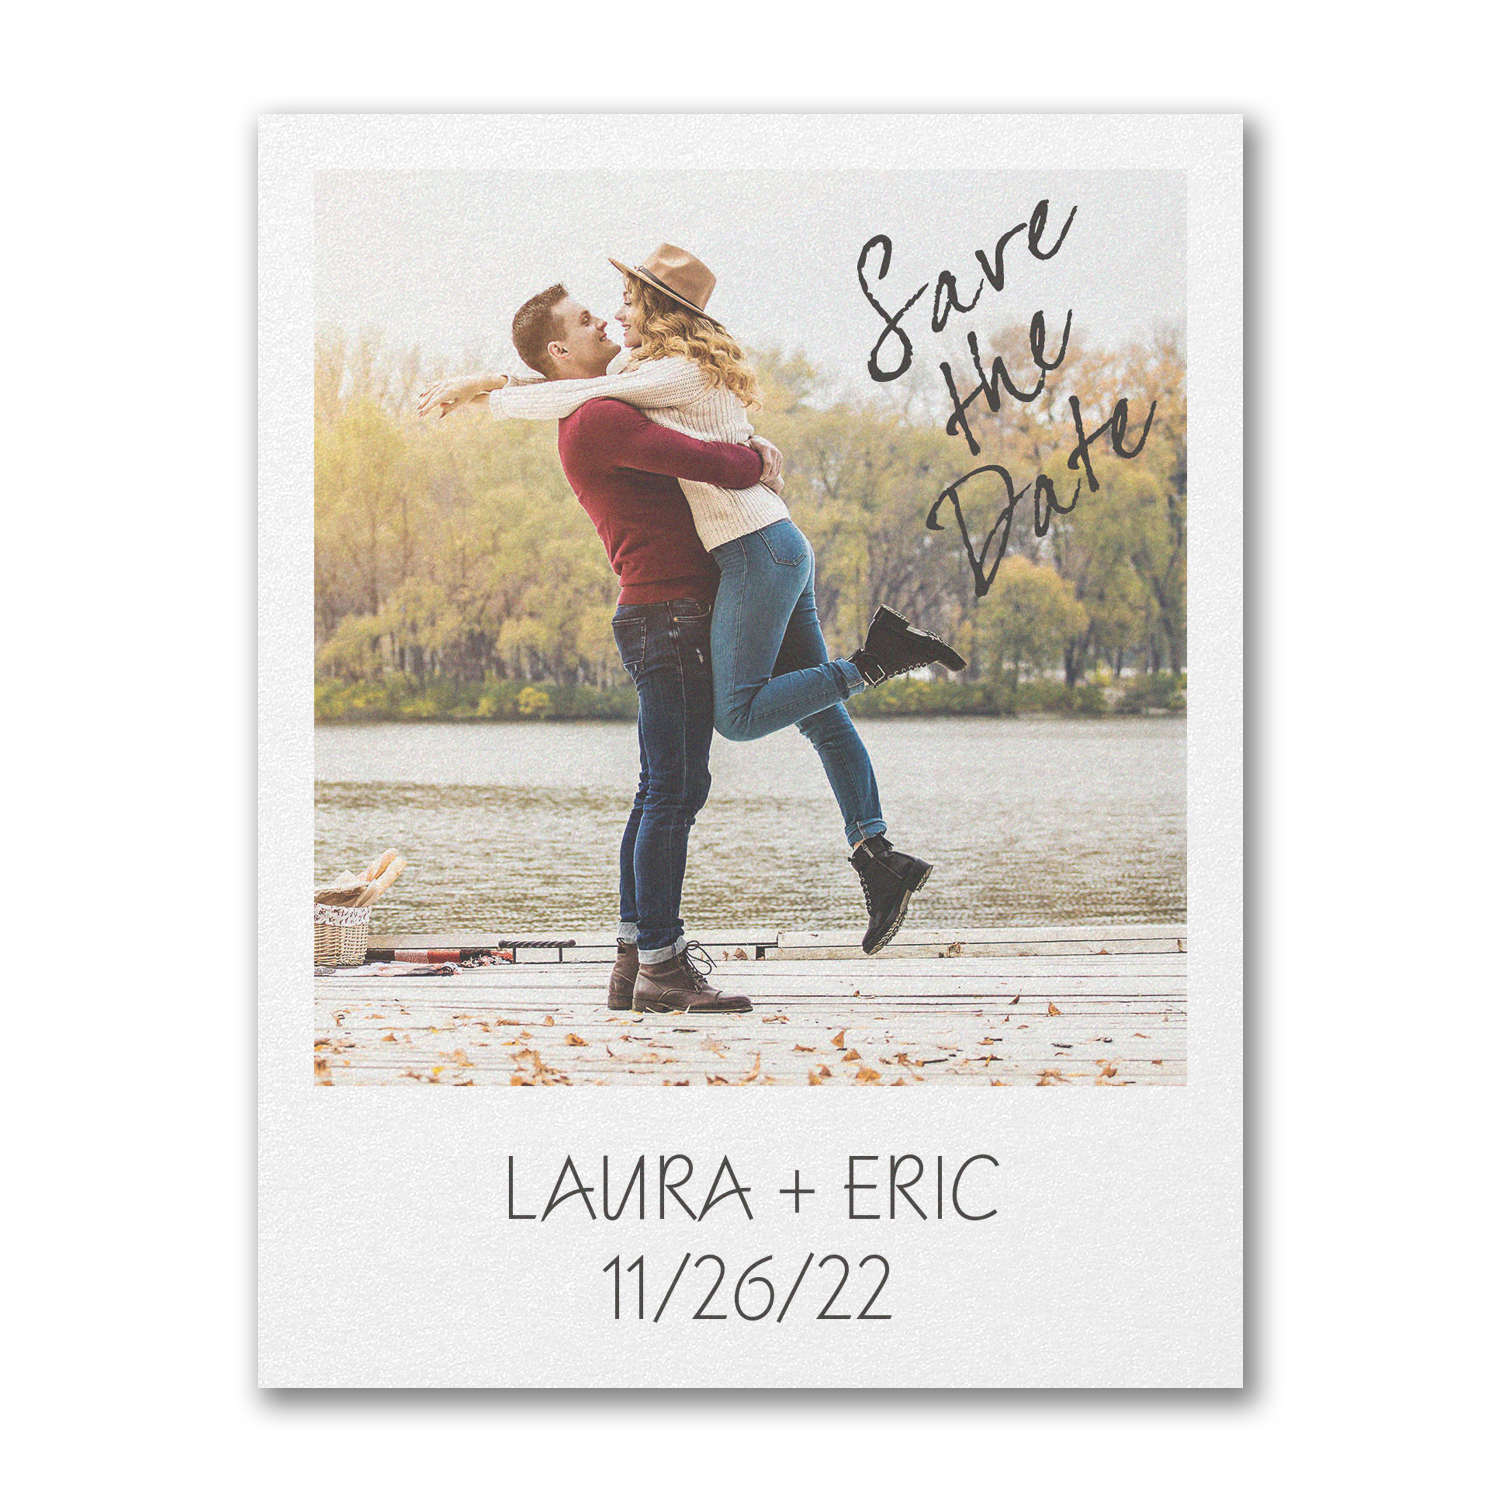 our bond photo postcard save the date carlson craft